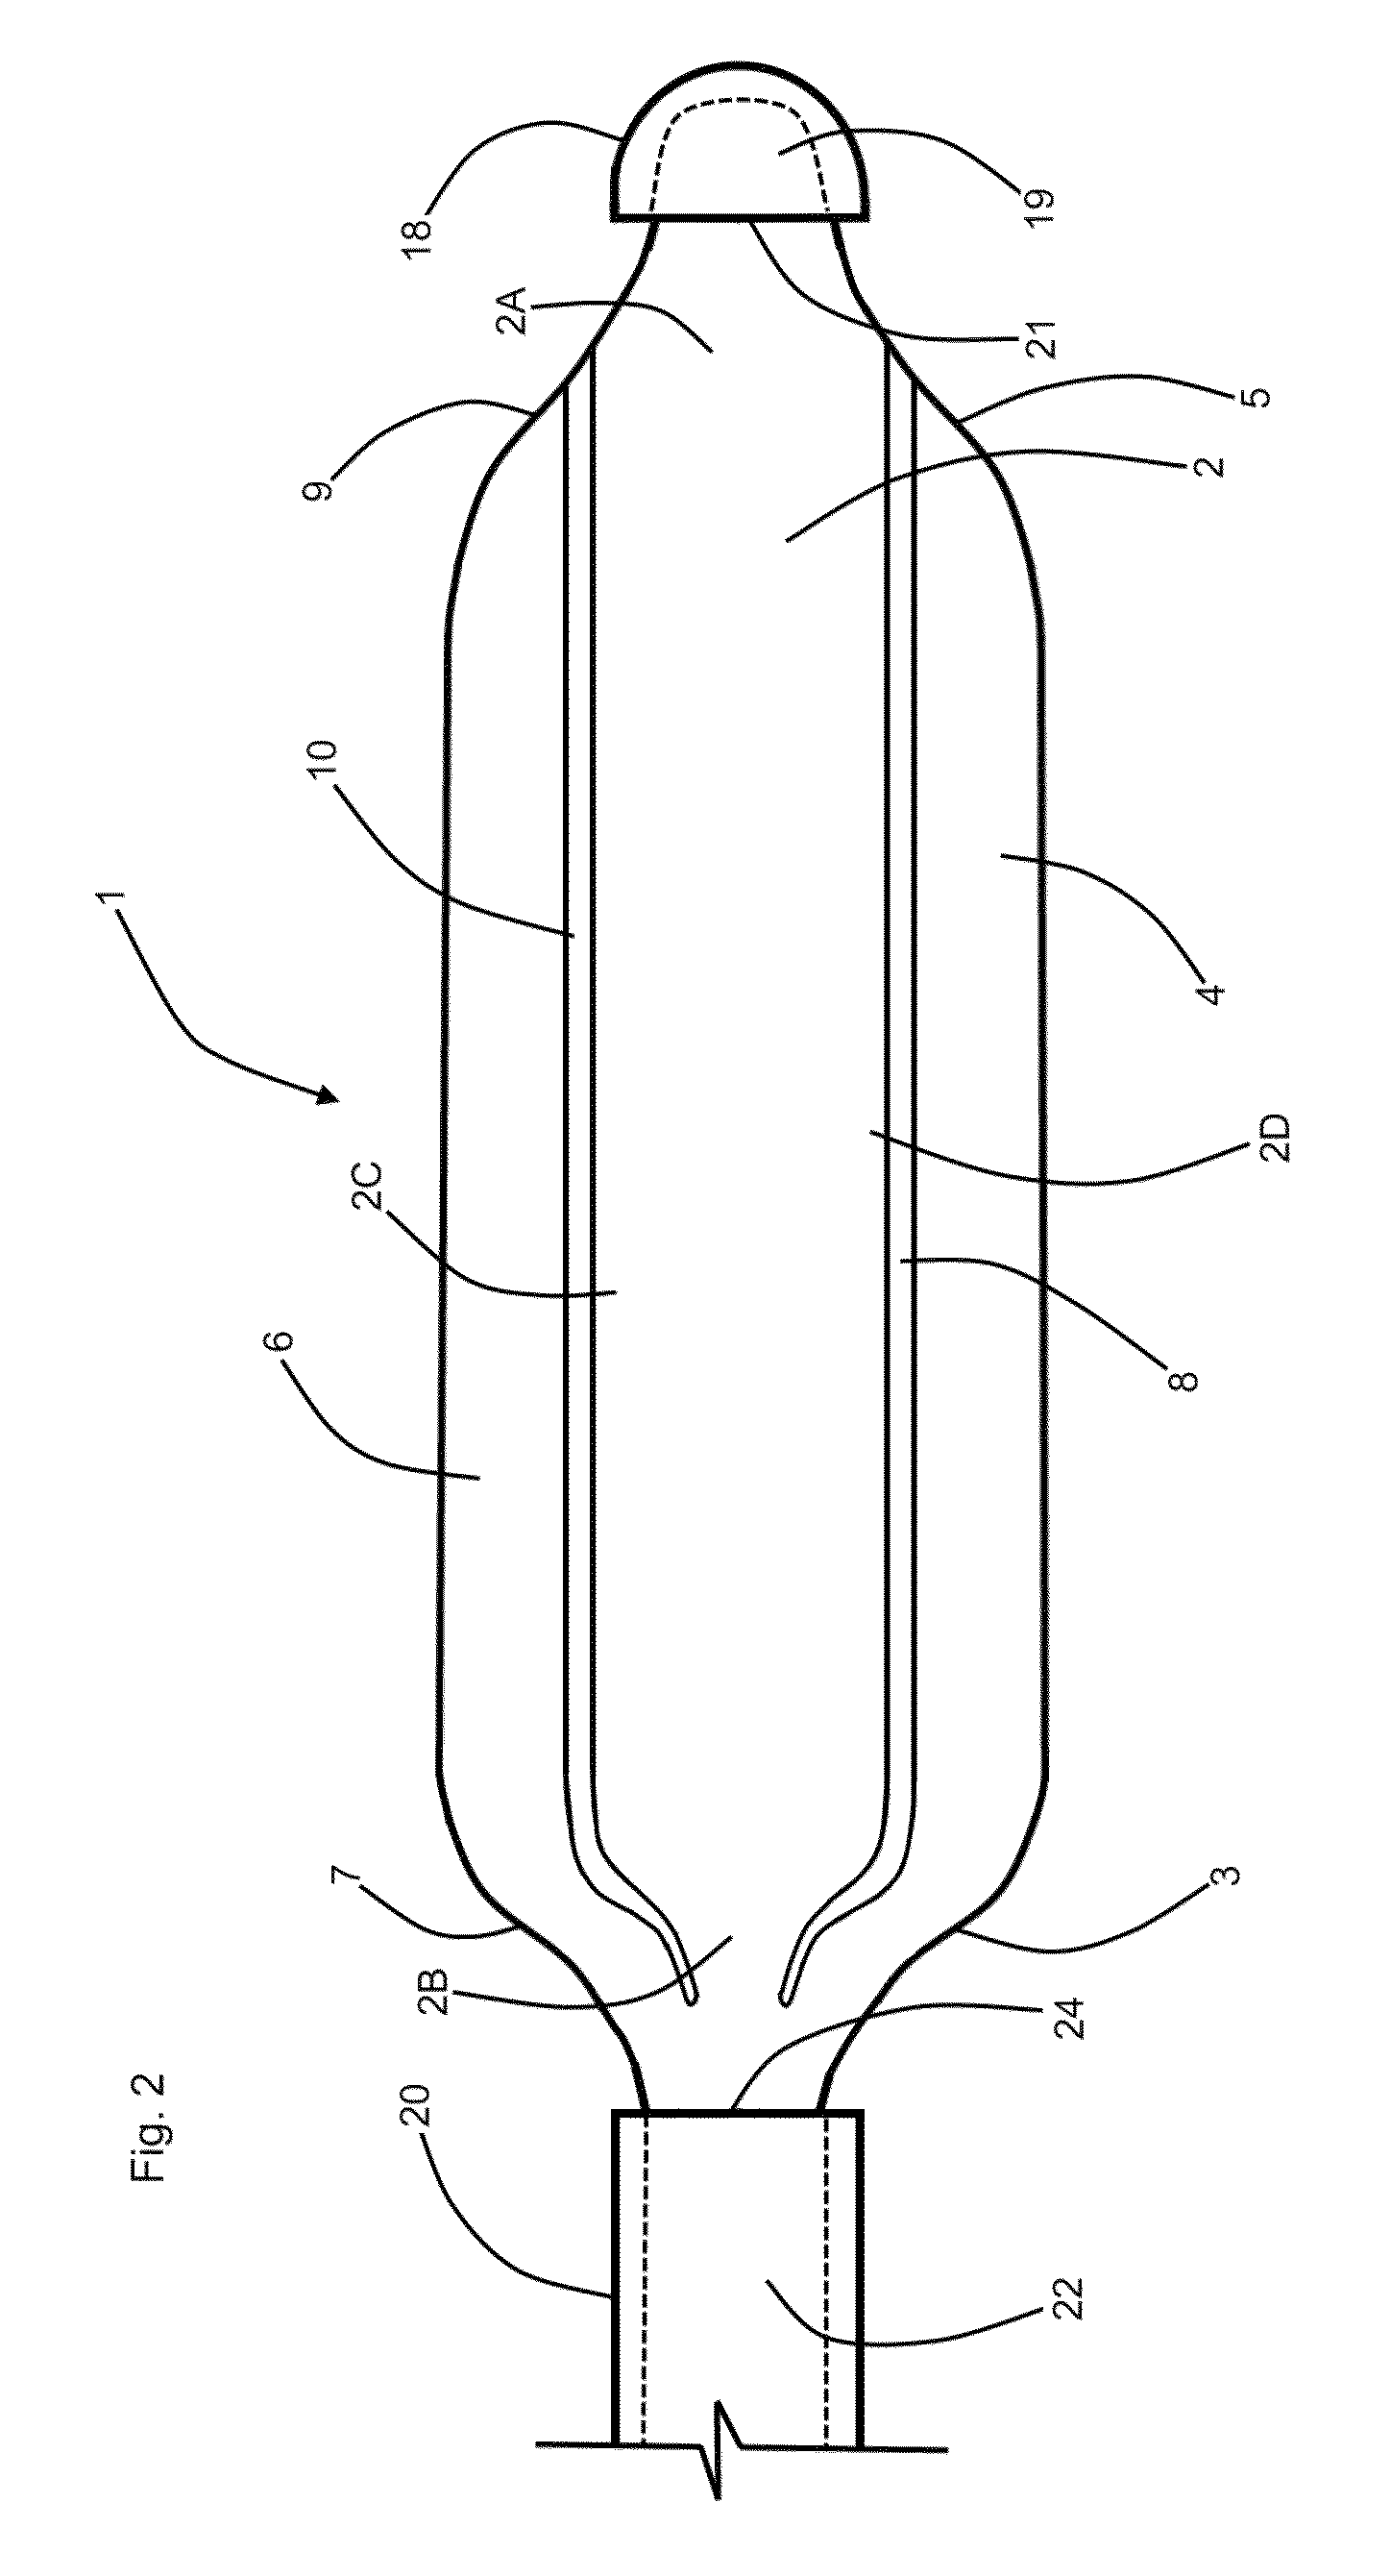 Assembly for pain suppressing electrical stimulation of a patient's spinal cord